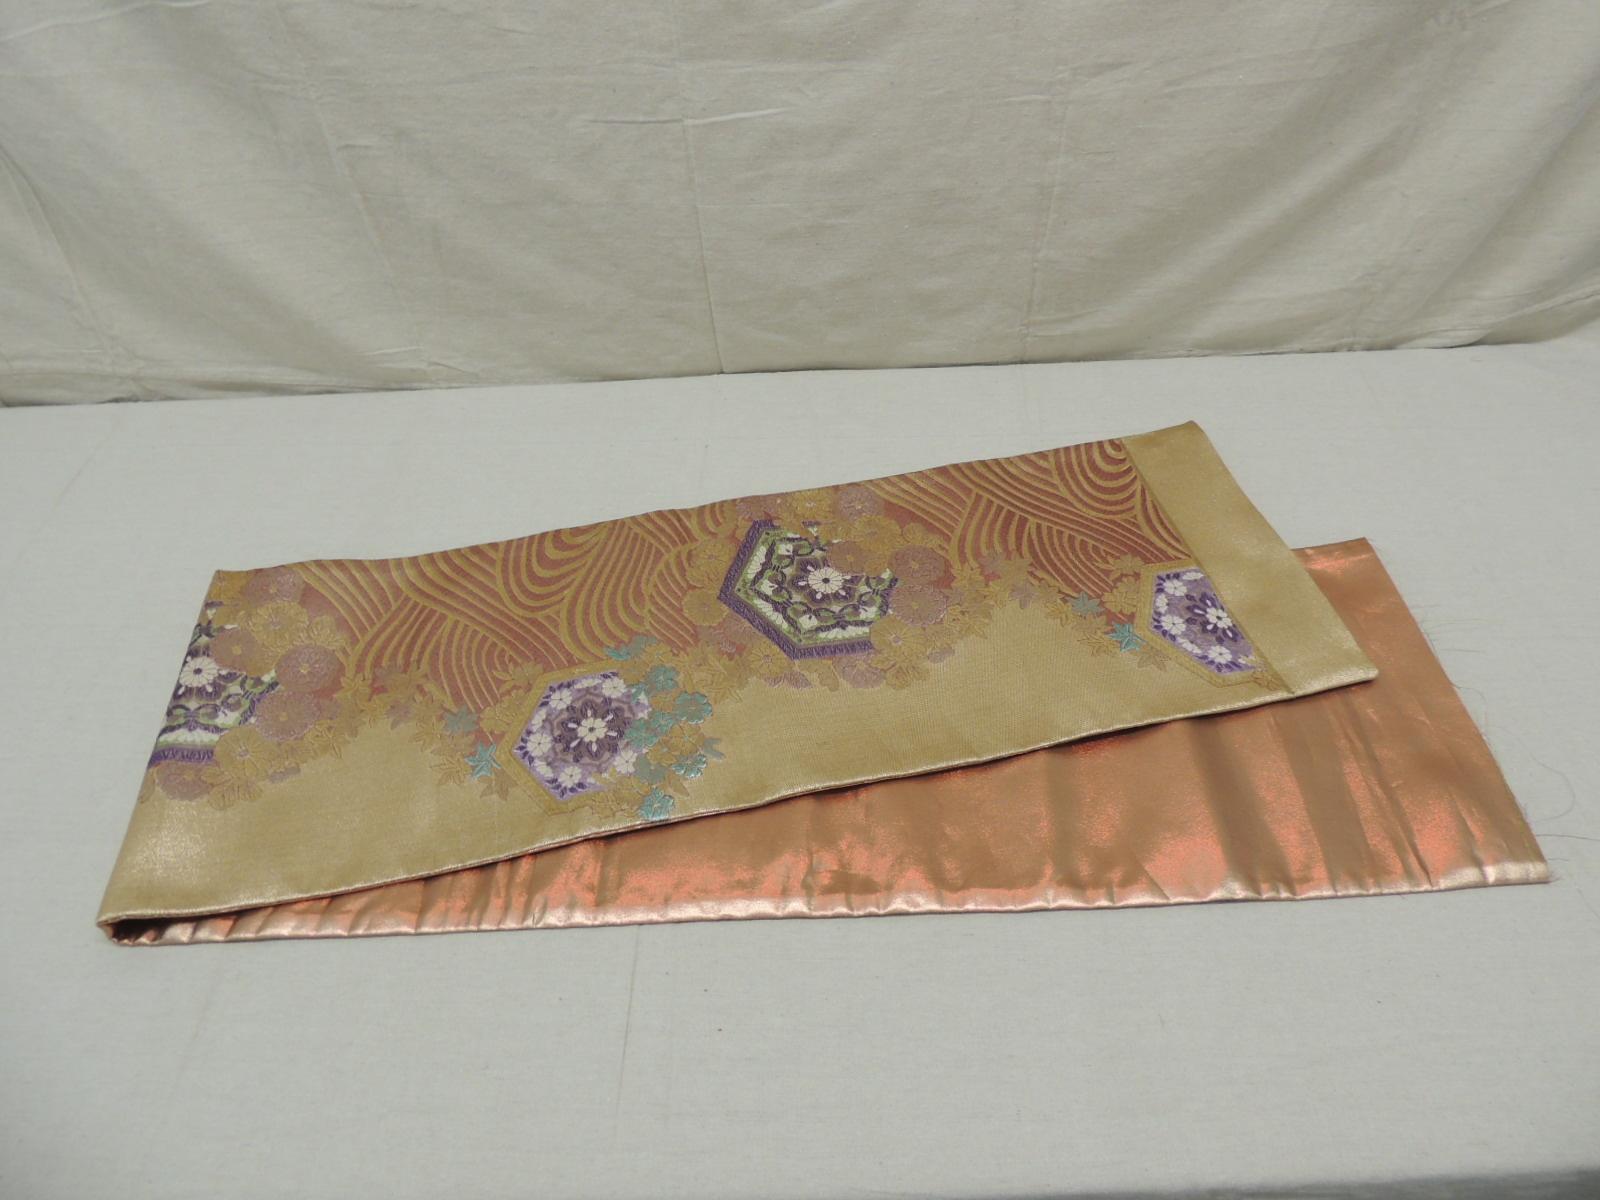 Long Golden Textured Woven Obi Textile Depicting Flowers in Bloom 1